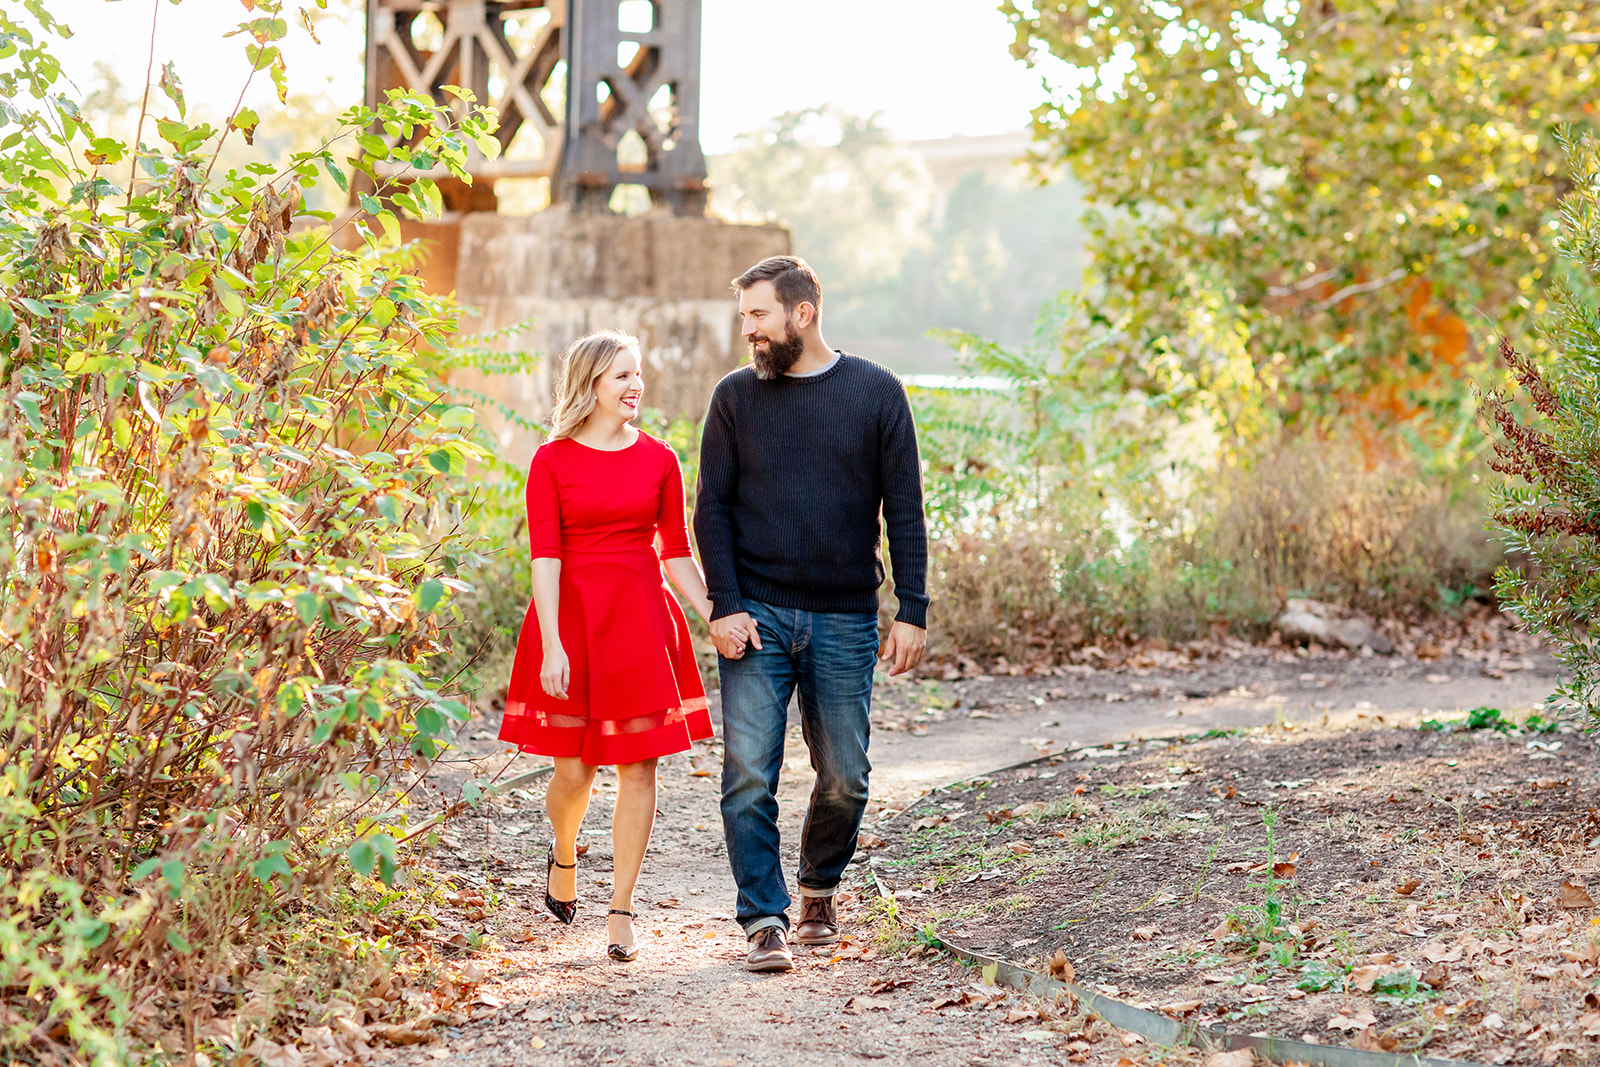 Amber  Michaels Fall Engagement Shoot at Belle Isle - Image Property of www.j-dphoto.com